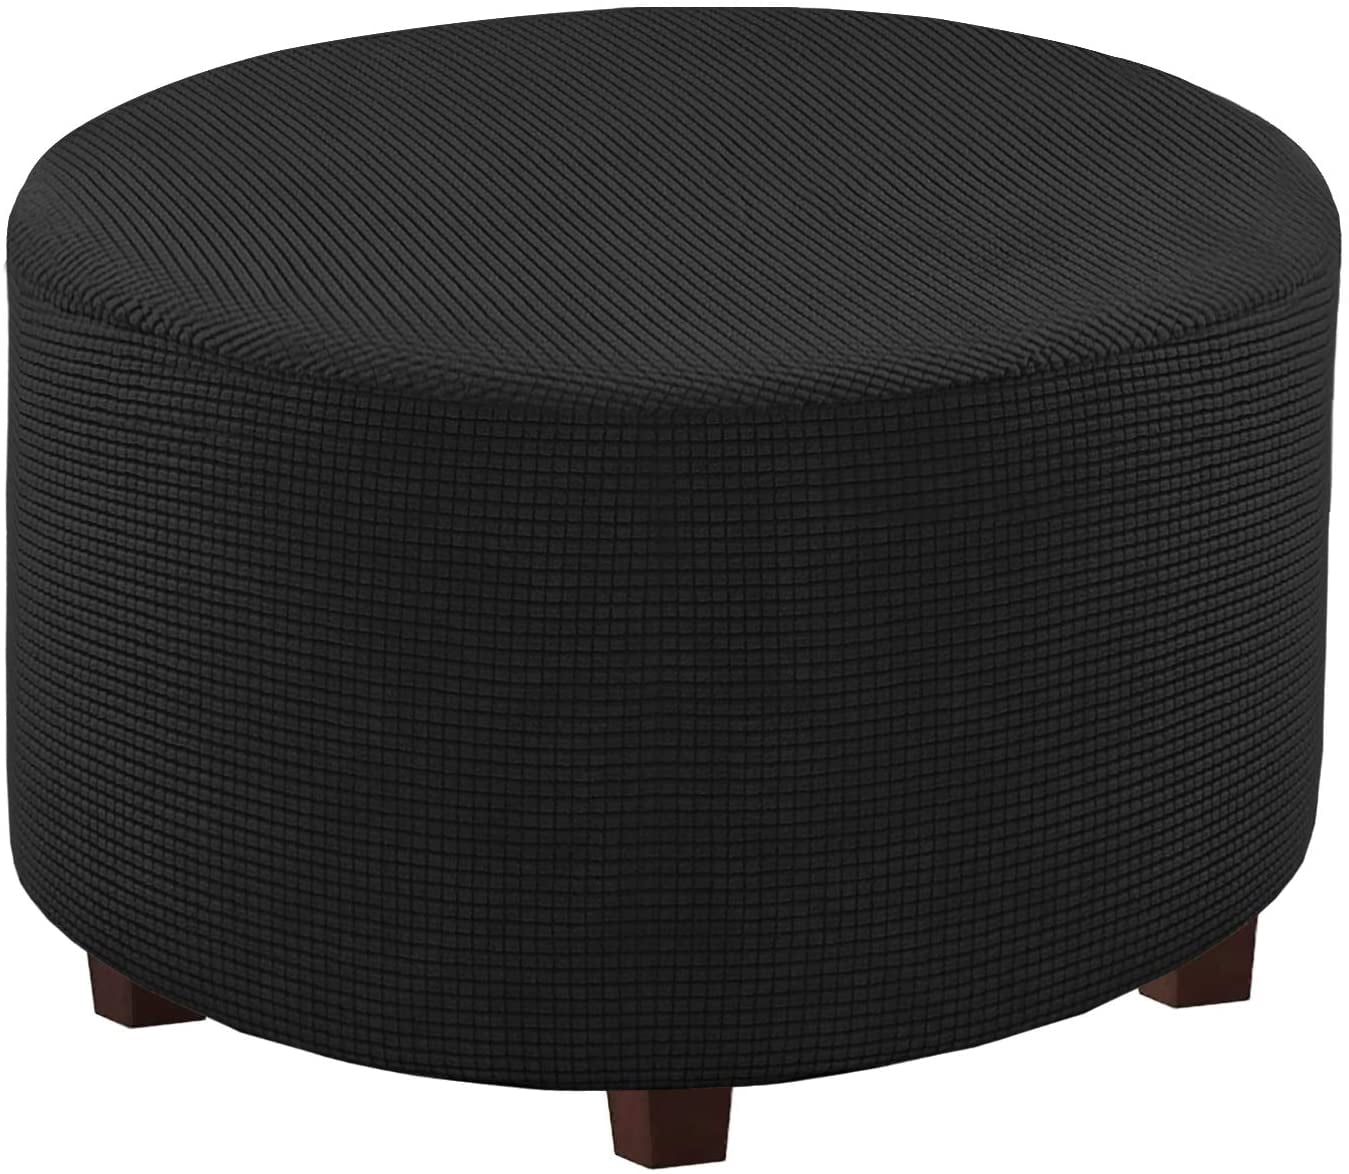 Details about   Round CubeOttoman Slipcover Footstool Footrest Cover Case Living Room Stool 